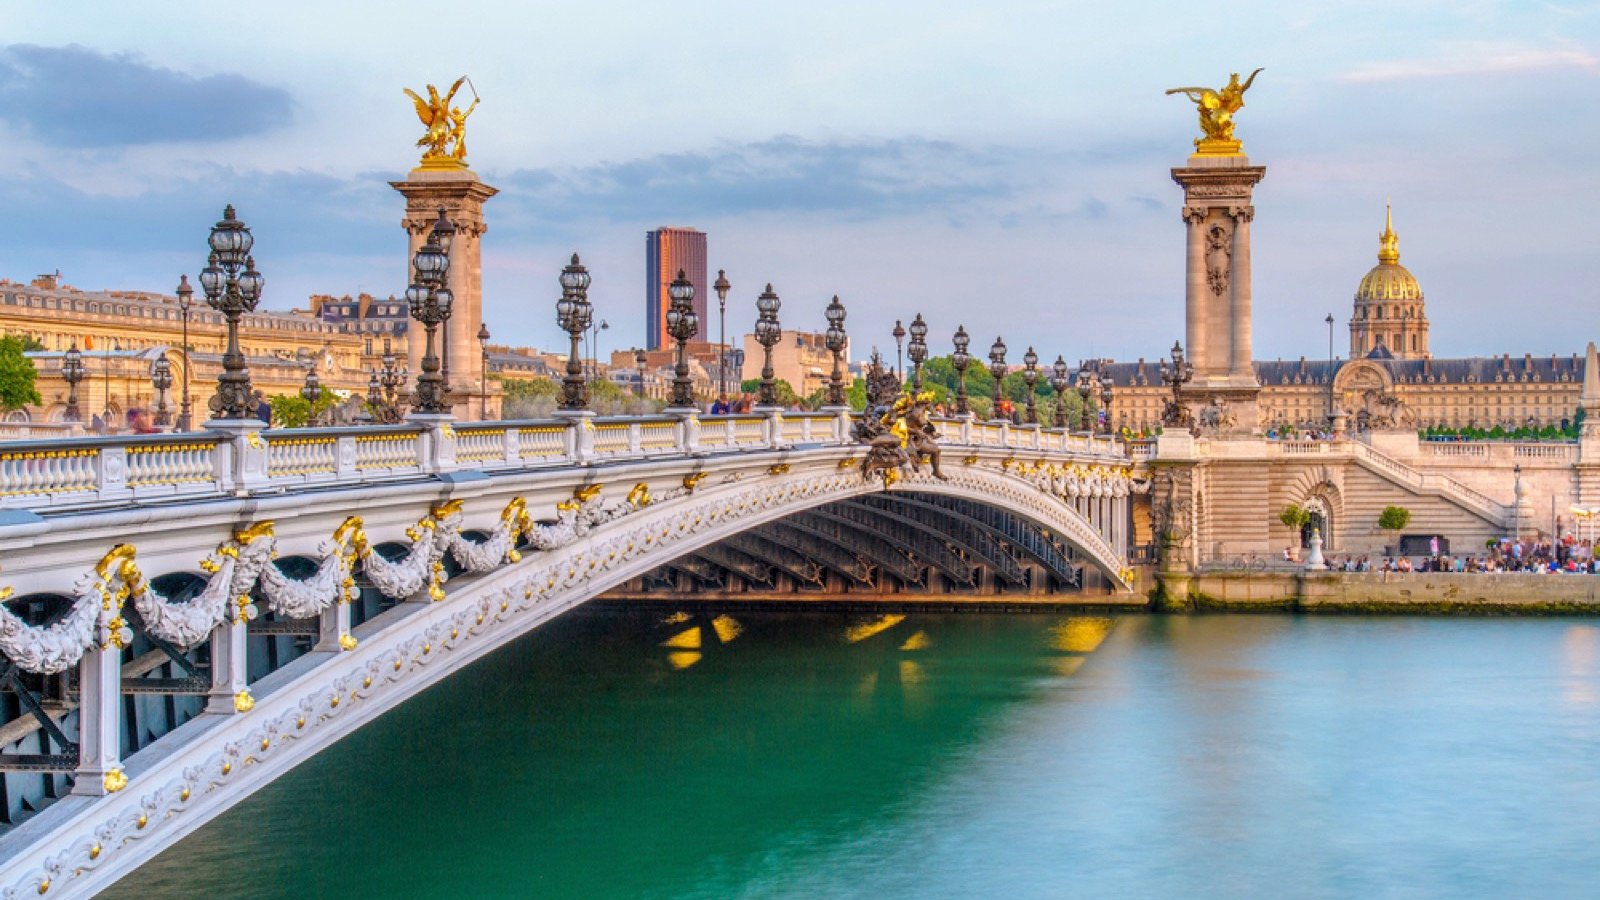 <p>Paris is on nearly everyone’s travel <a href="https://www.kindafrugal.com/12-favorite-vacation-spots-that-deserve-a-spot-on-your-bucket-list/">bucket list</a>. Enjoy the cozy cafes and sip delicious coffee while gazing at the sparkling lights on the Eiffel Tower. Listen to the Parisians’ delicious French accents. “C’est magnifique.” Walk along the Seine and stroll around Luxembourg Gardens. Take the bustling metro and take in the historic charm of the Paris museums. There’s so much to do in Paris. Recapture the romance of your youth and leave France feeling revitalized.</p>